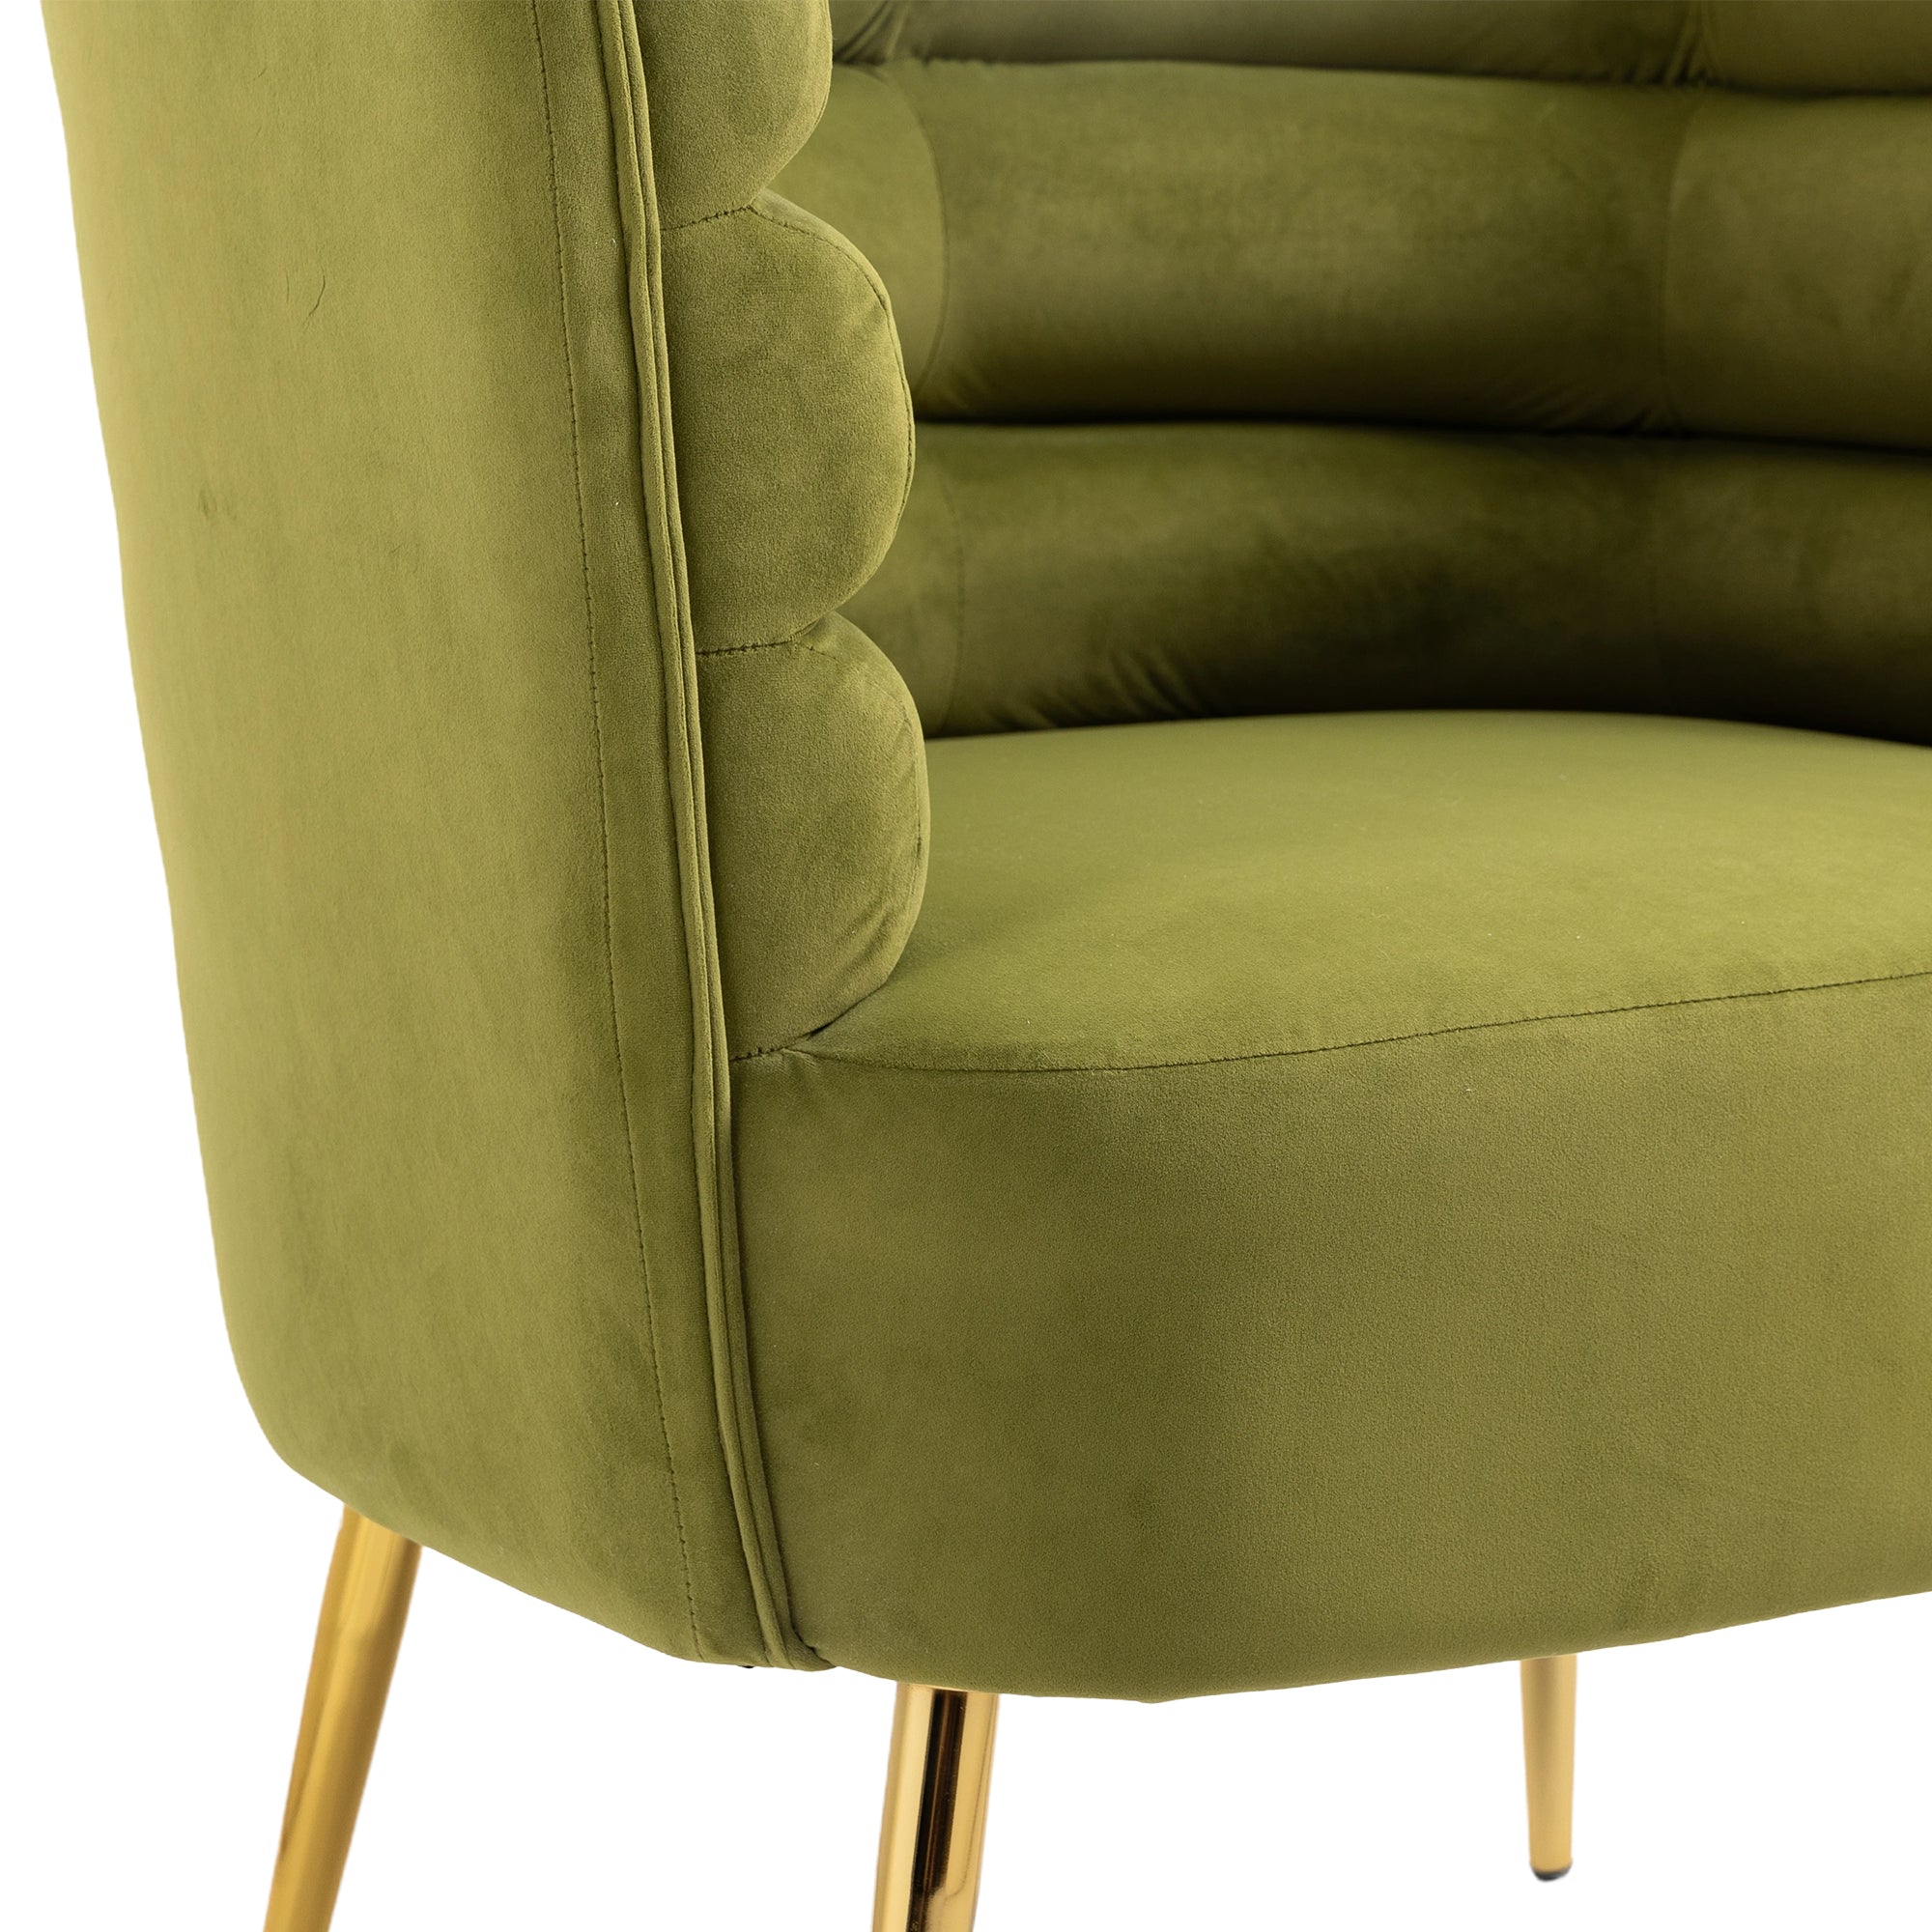 COOLMORE Accent Chair ,leisure single chair with olive green-velvet